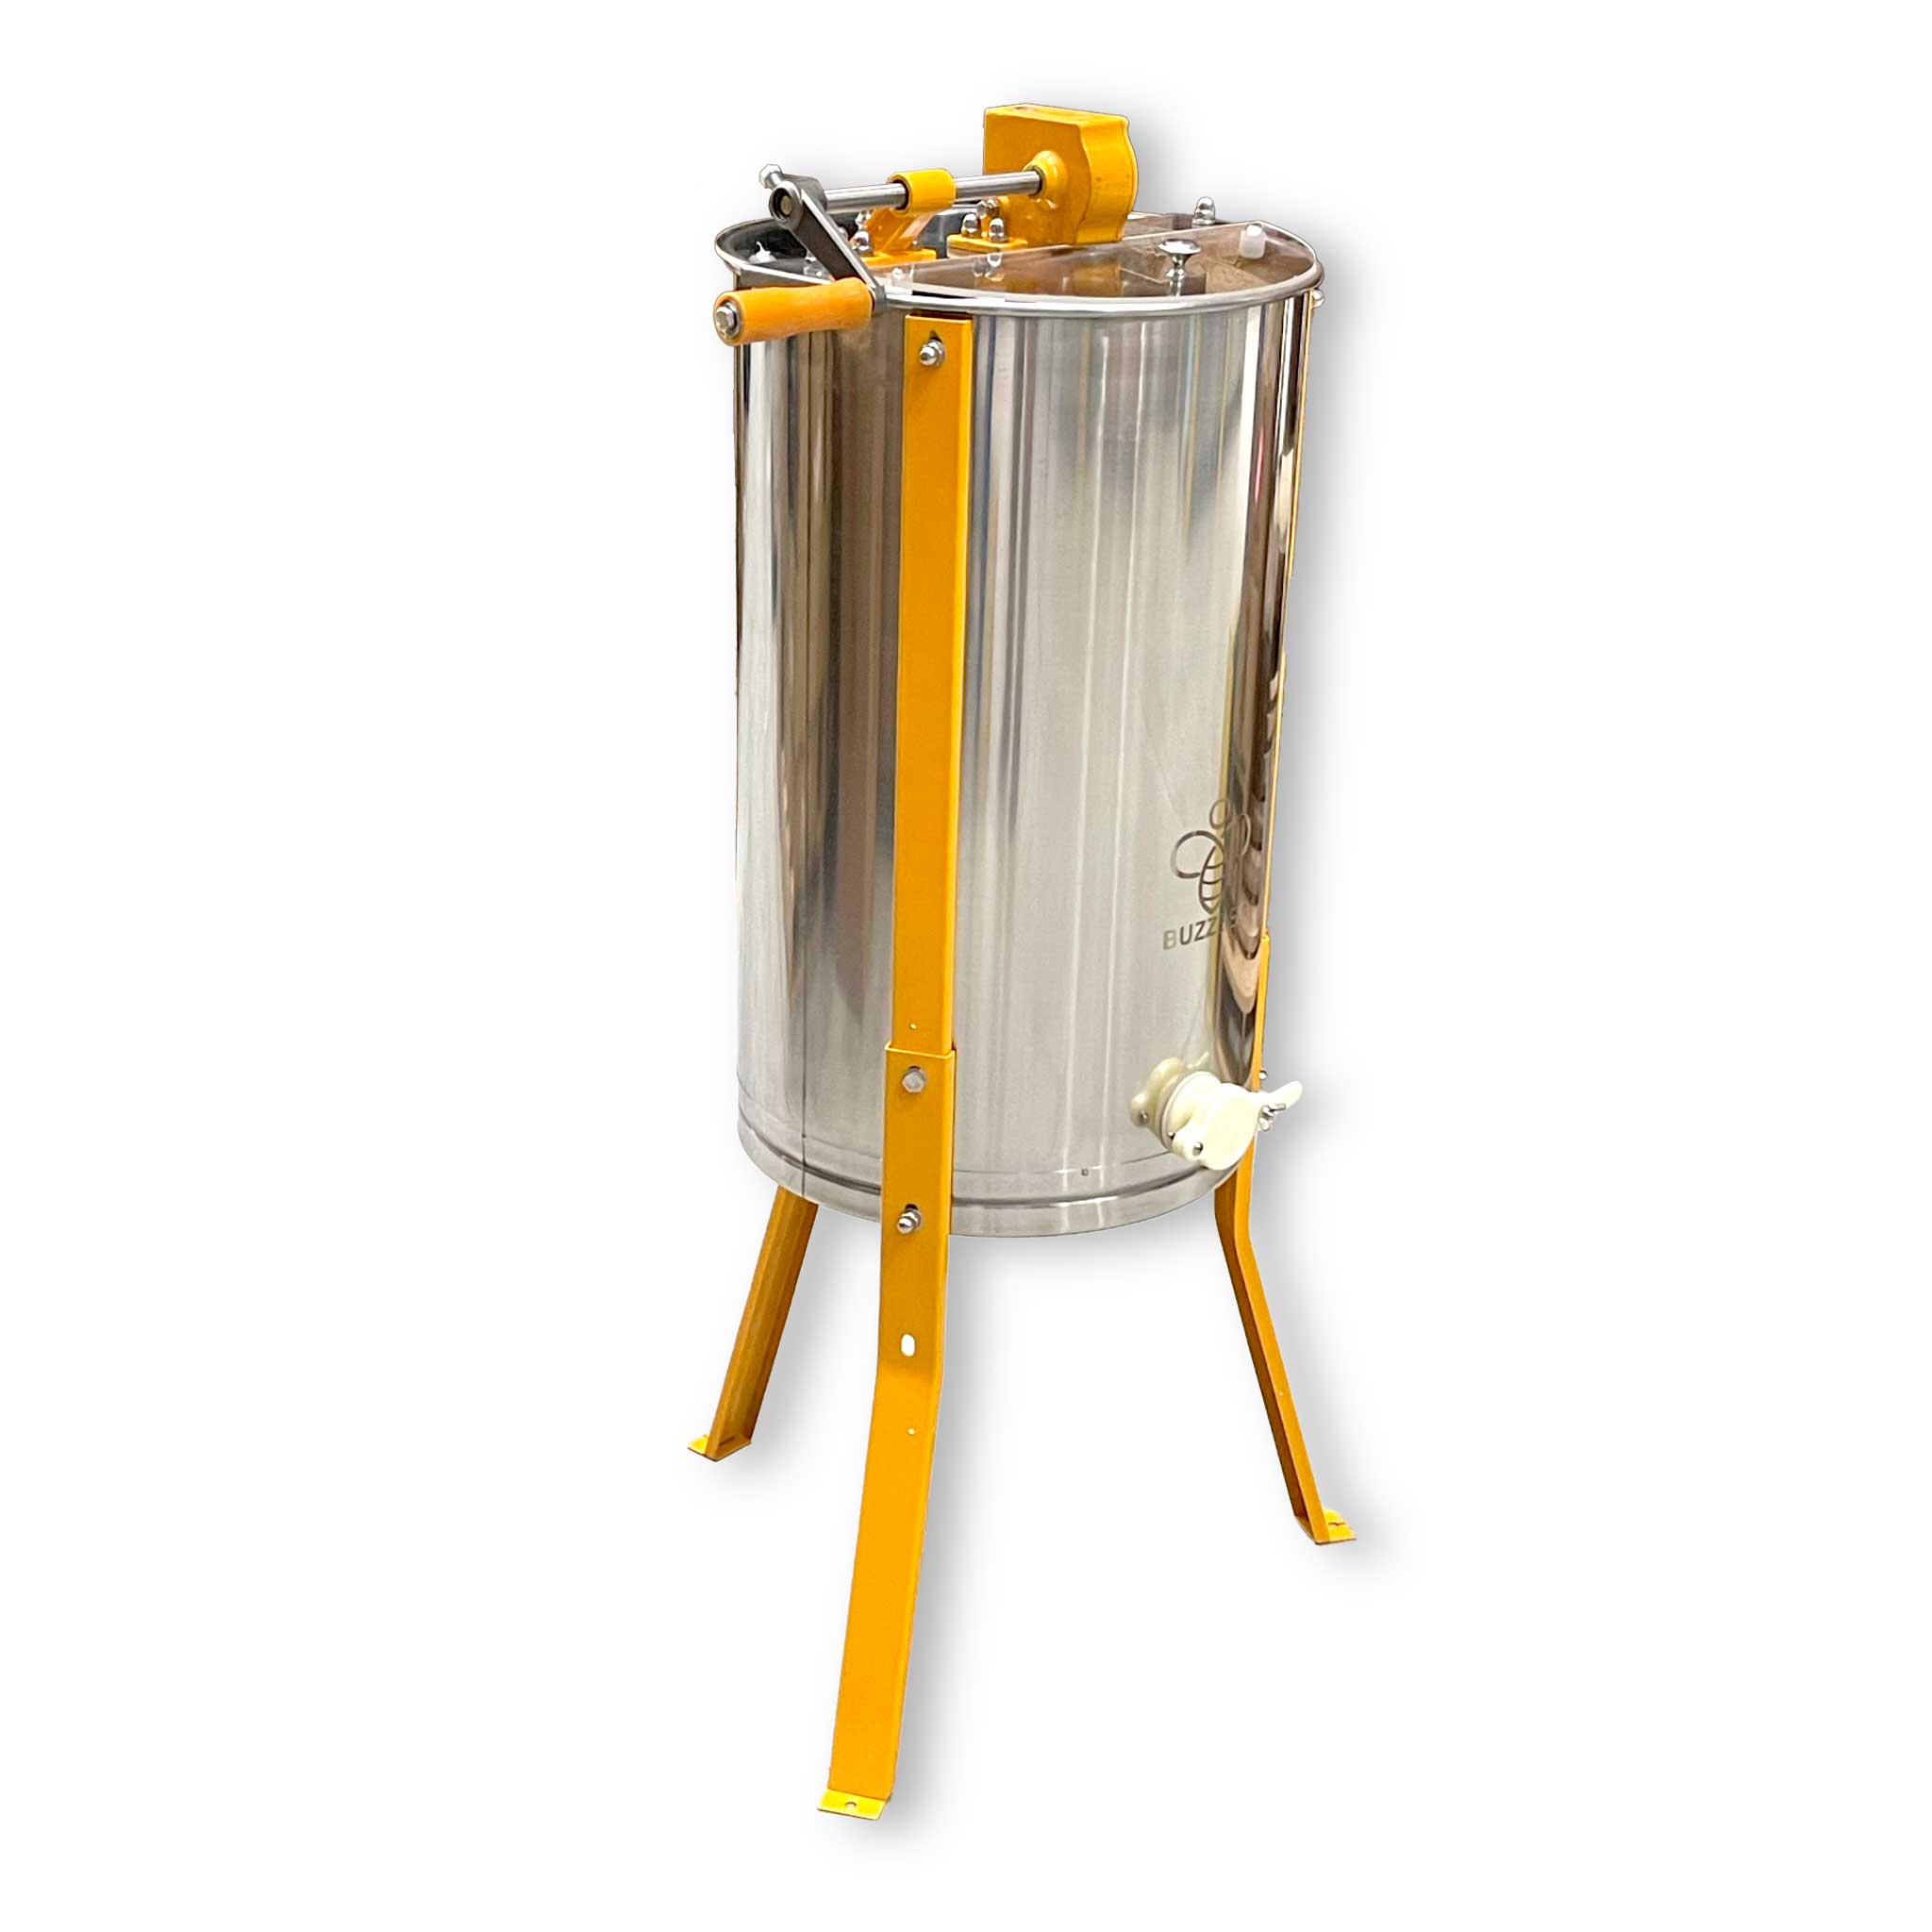 Buzzbee 2 Frame Manual Stainless Steel Honey Extractor with Emergency Break System - Honey Extractor collection by Buzzbee Beekeeping Supplies